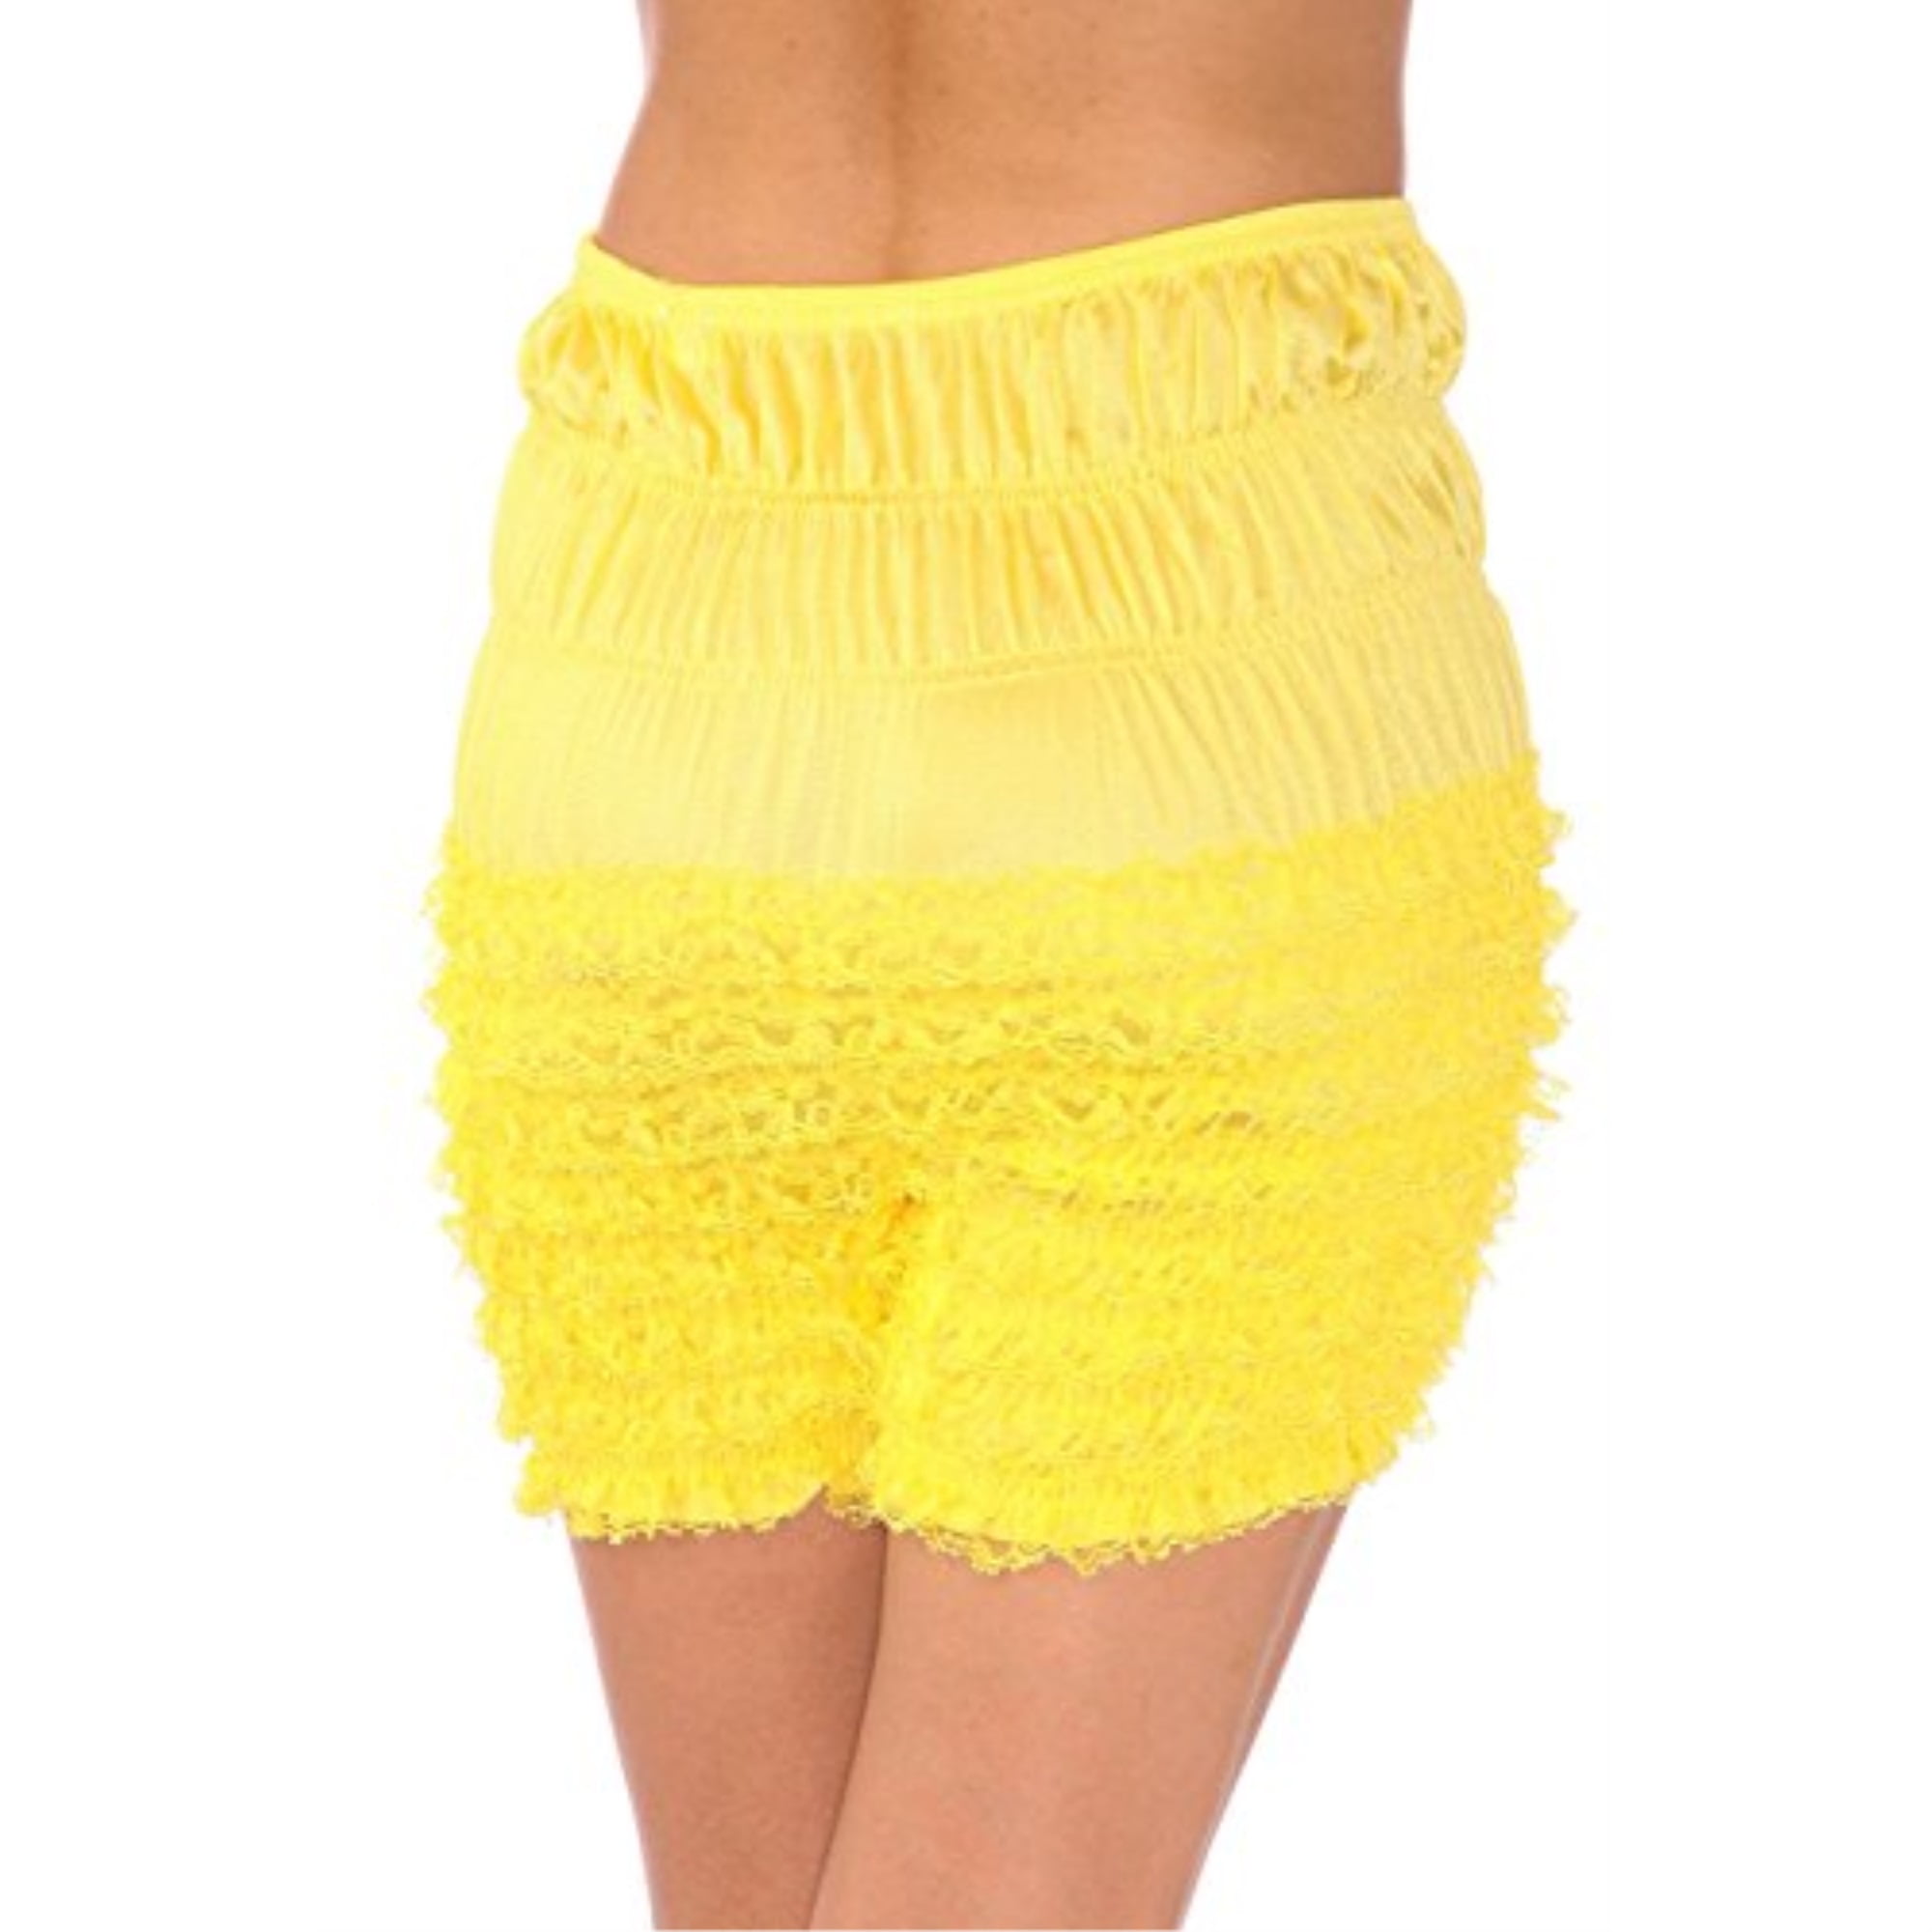 Malco Modes Adult Pettipants, Style N24, Sexy Ruffled Panties (Yellow ...